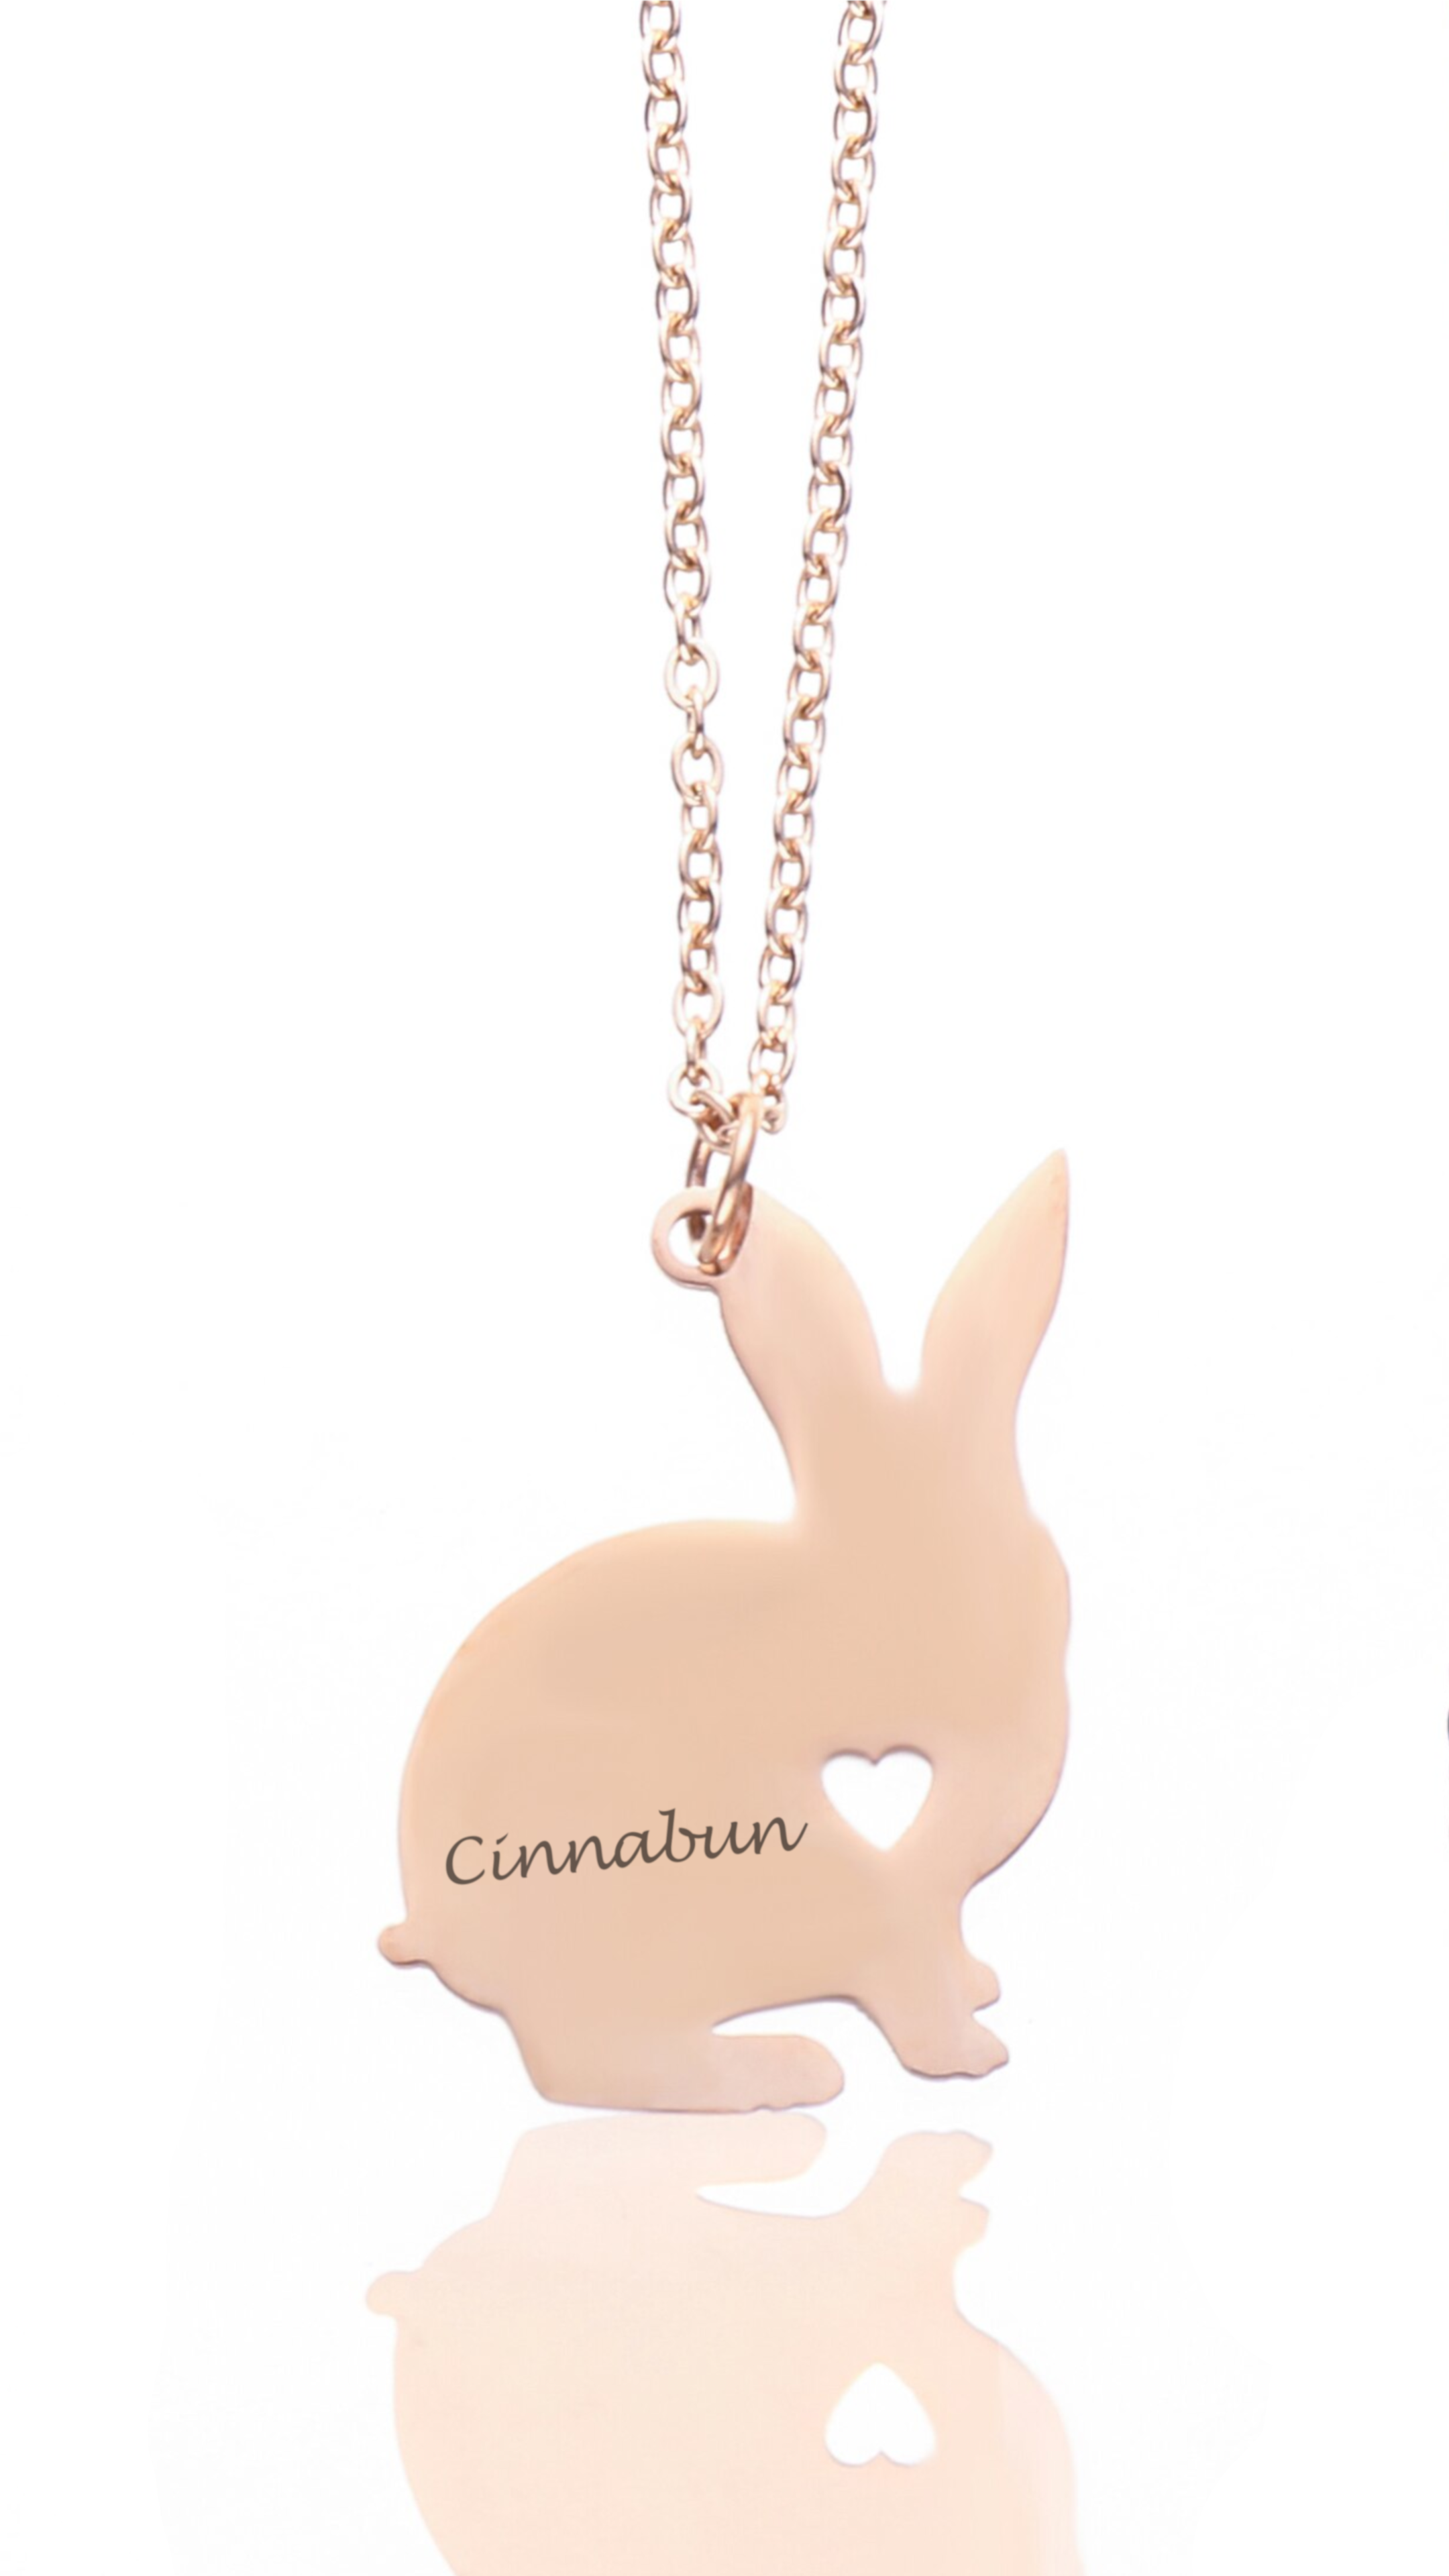 Eilygen Bunny Necklace Stainless Steel Bunny Pendant Initial Necklace  Rabbit Necklace Gifts for Women Girls Rabbit Lovers